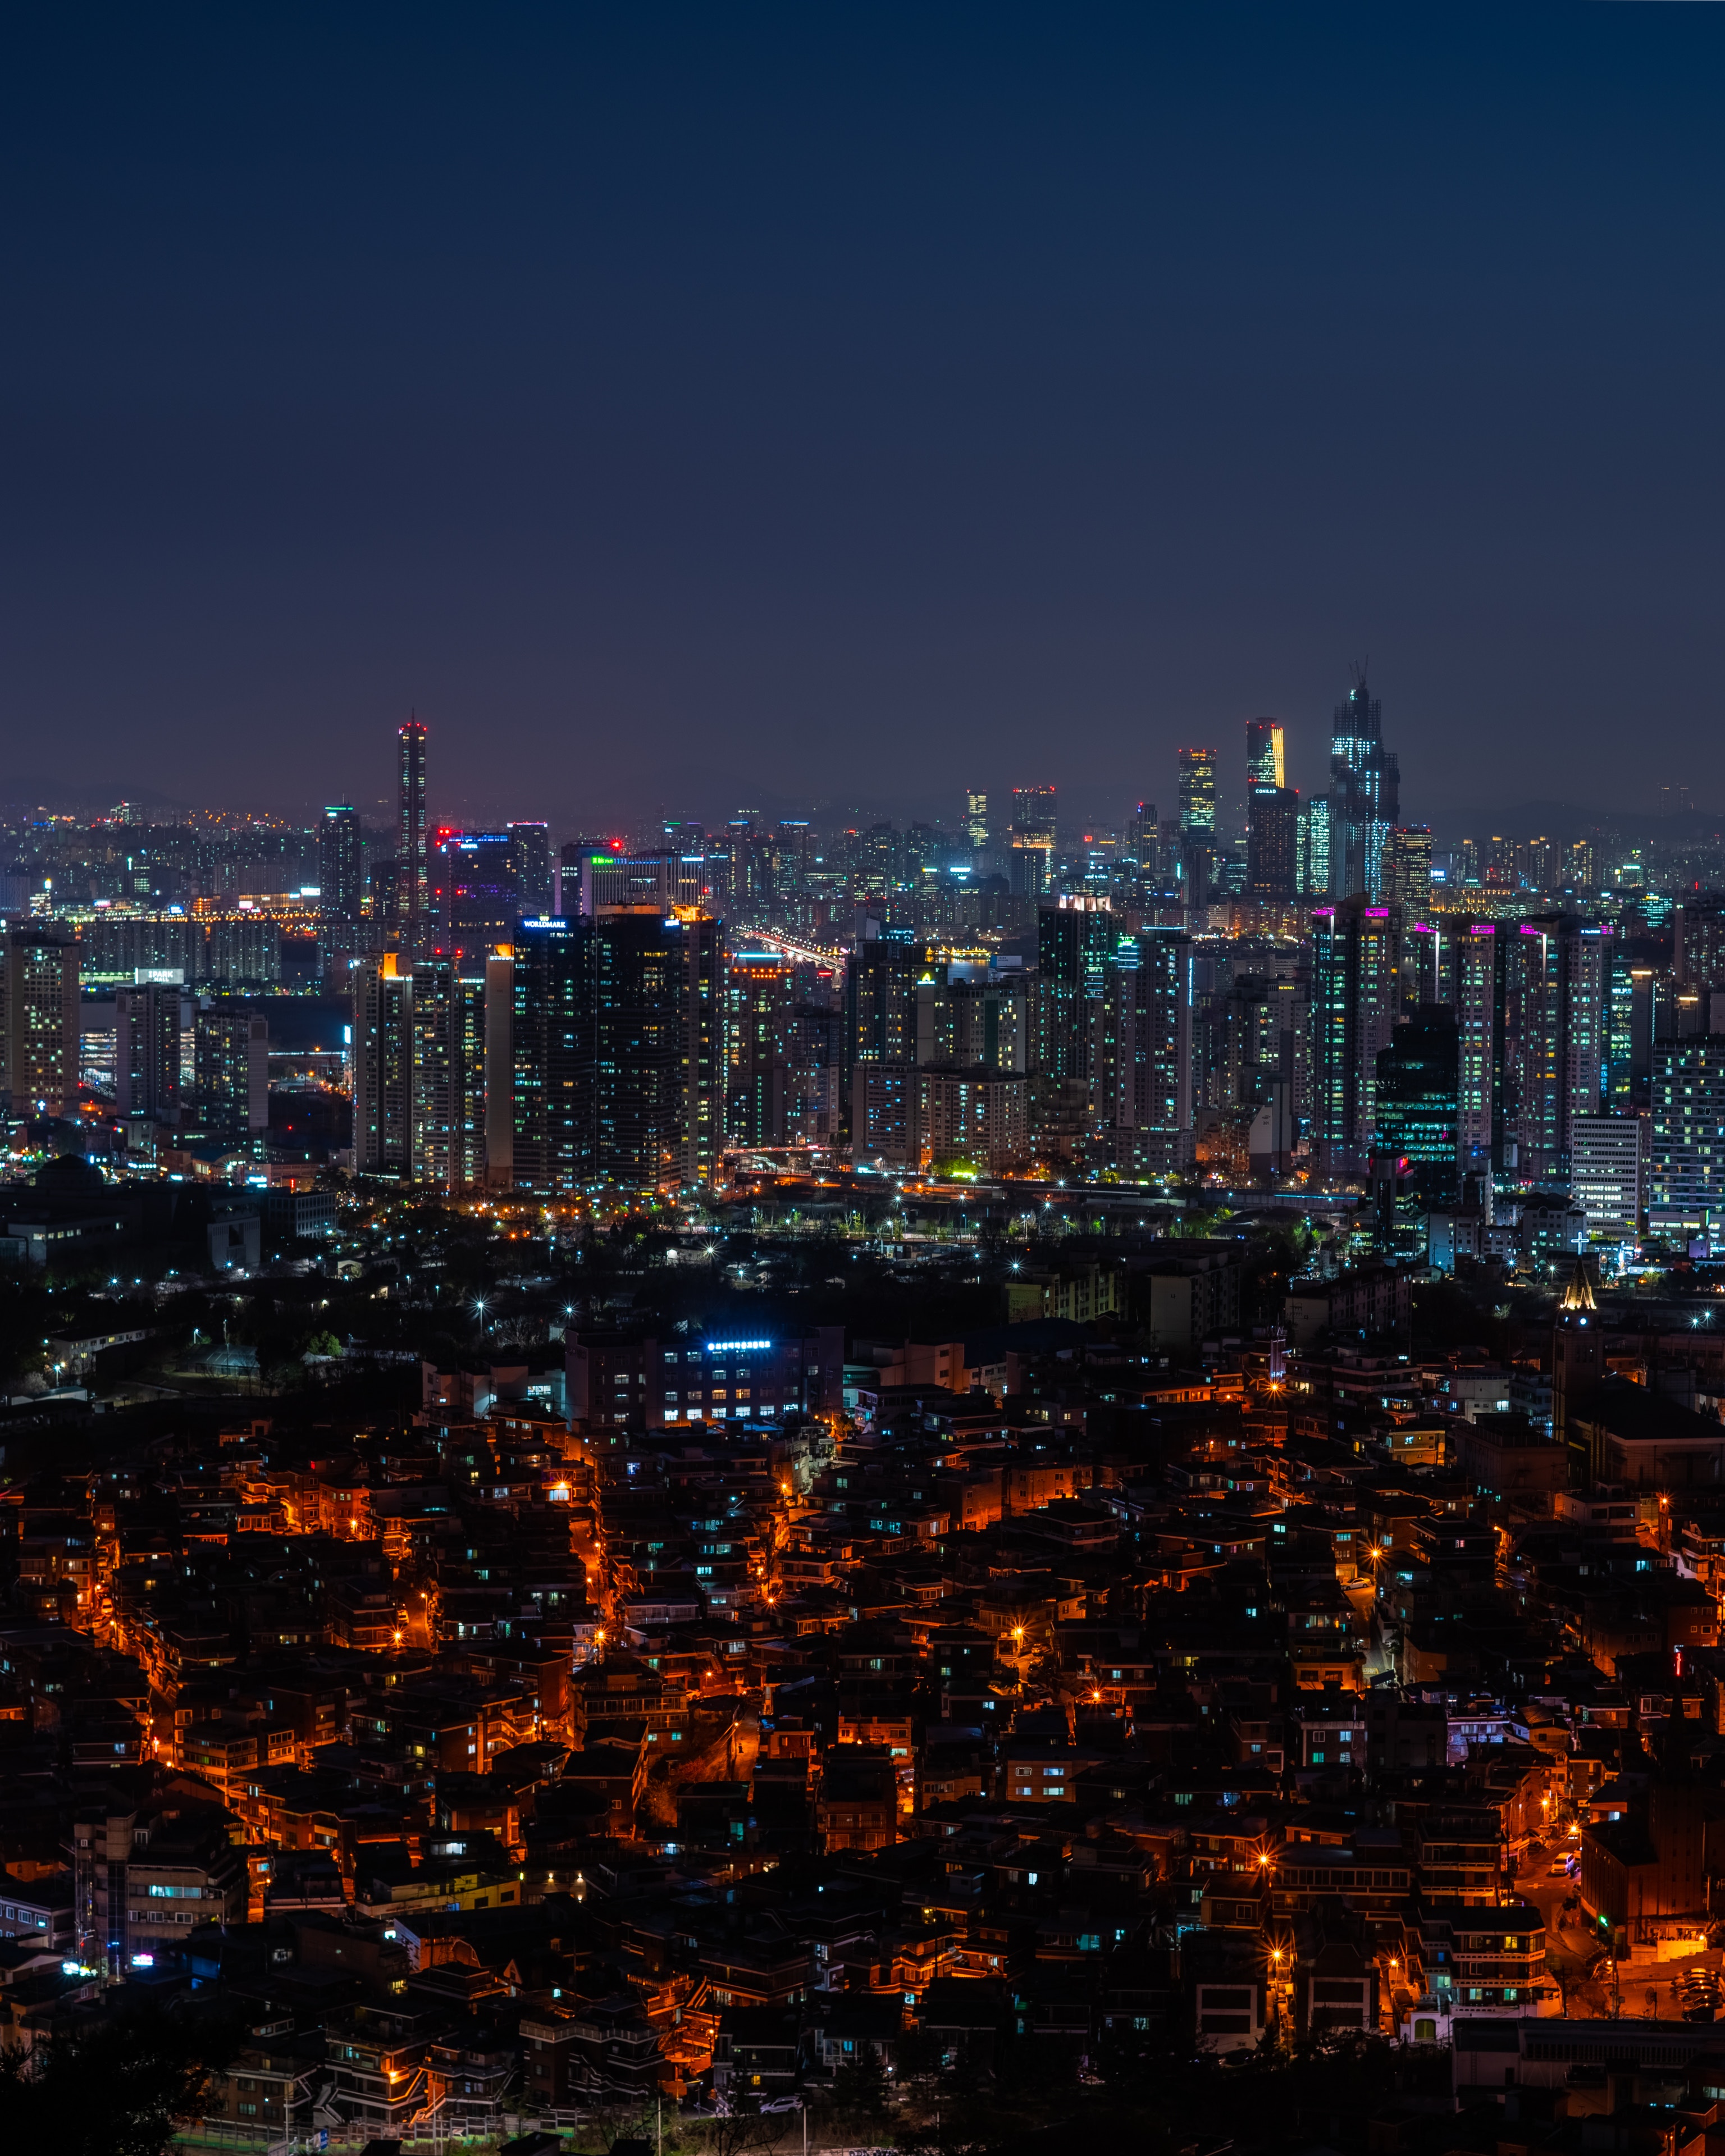 city lights, panorama, cities, night, architecture, building, city, view from above, urban landscape, cityscape